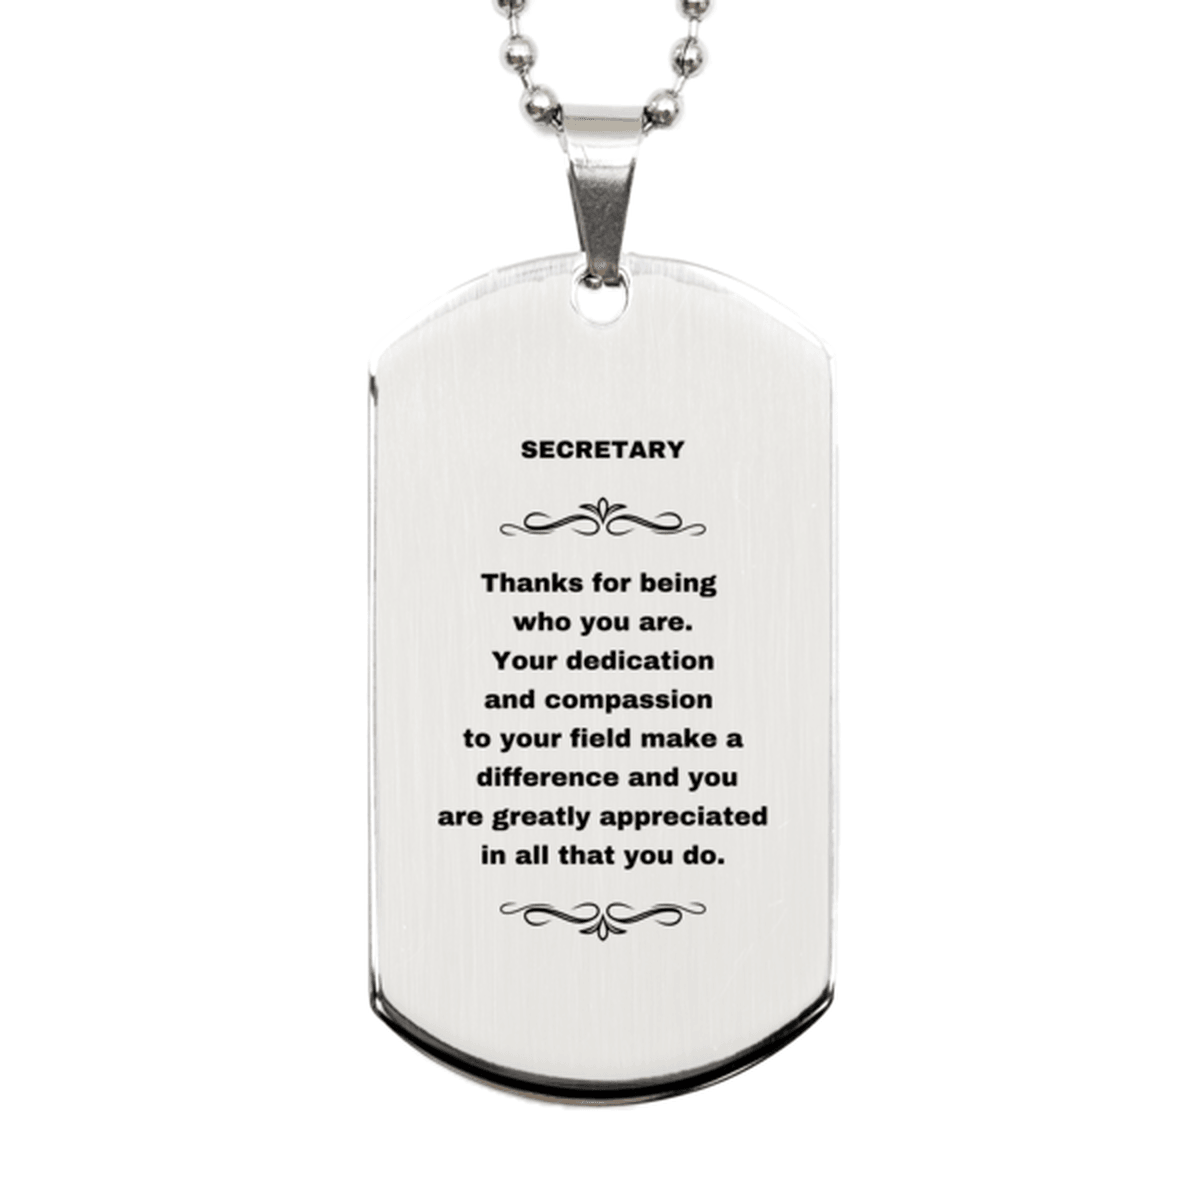 Secretary Silver Engraved Dog Tag Necklace - Thanks for being who you are - Birthday Christmas Jewelry Gifts Coworkers Colleague Boss - Mallard Moon Gift Shop